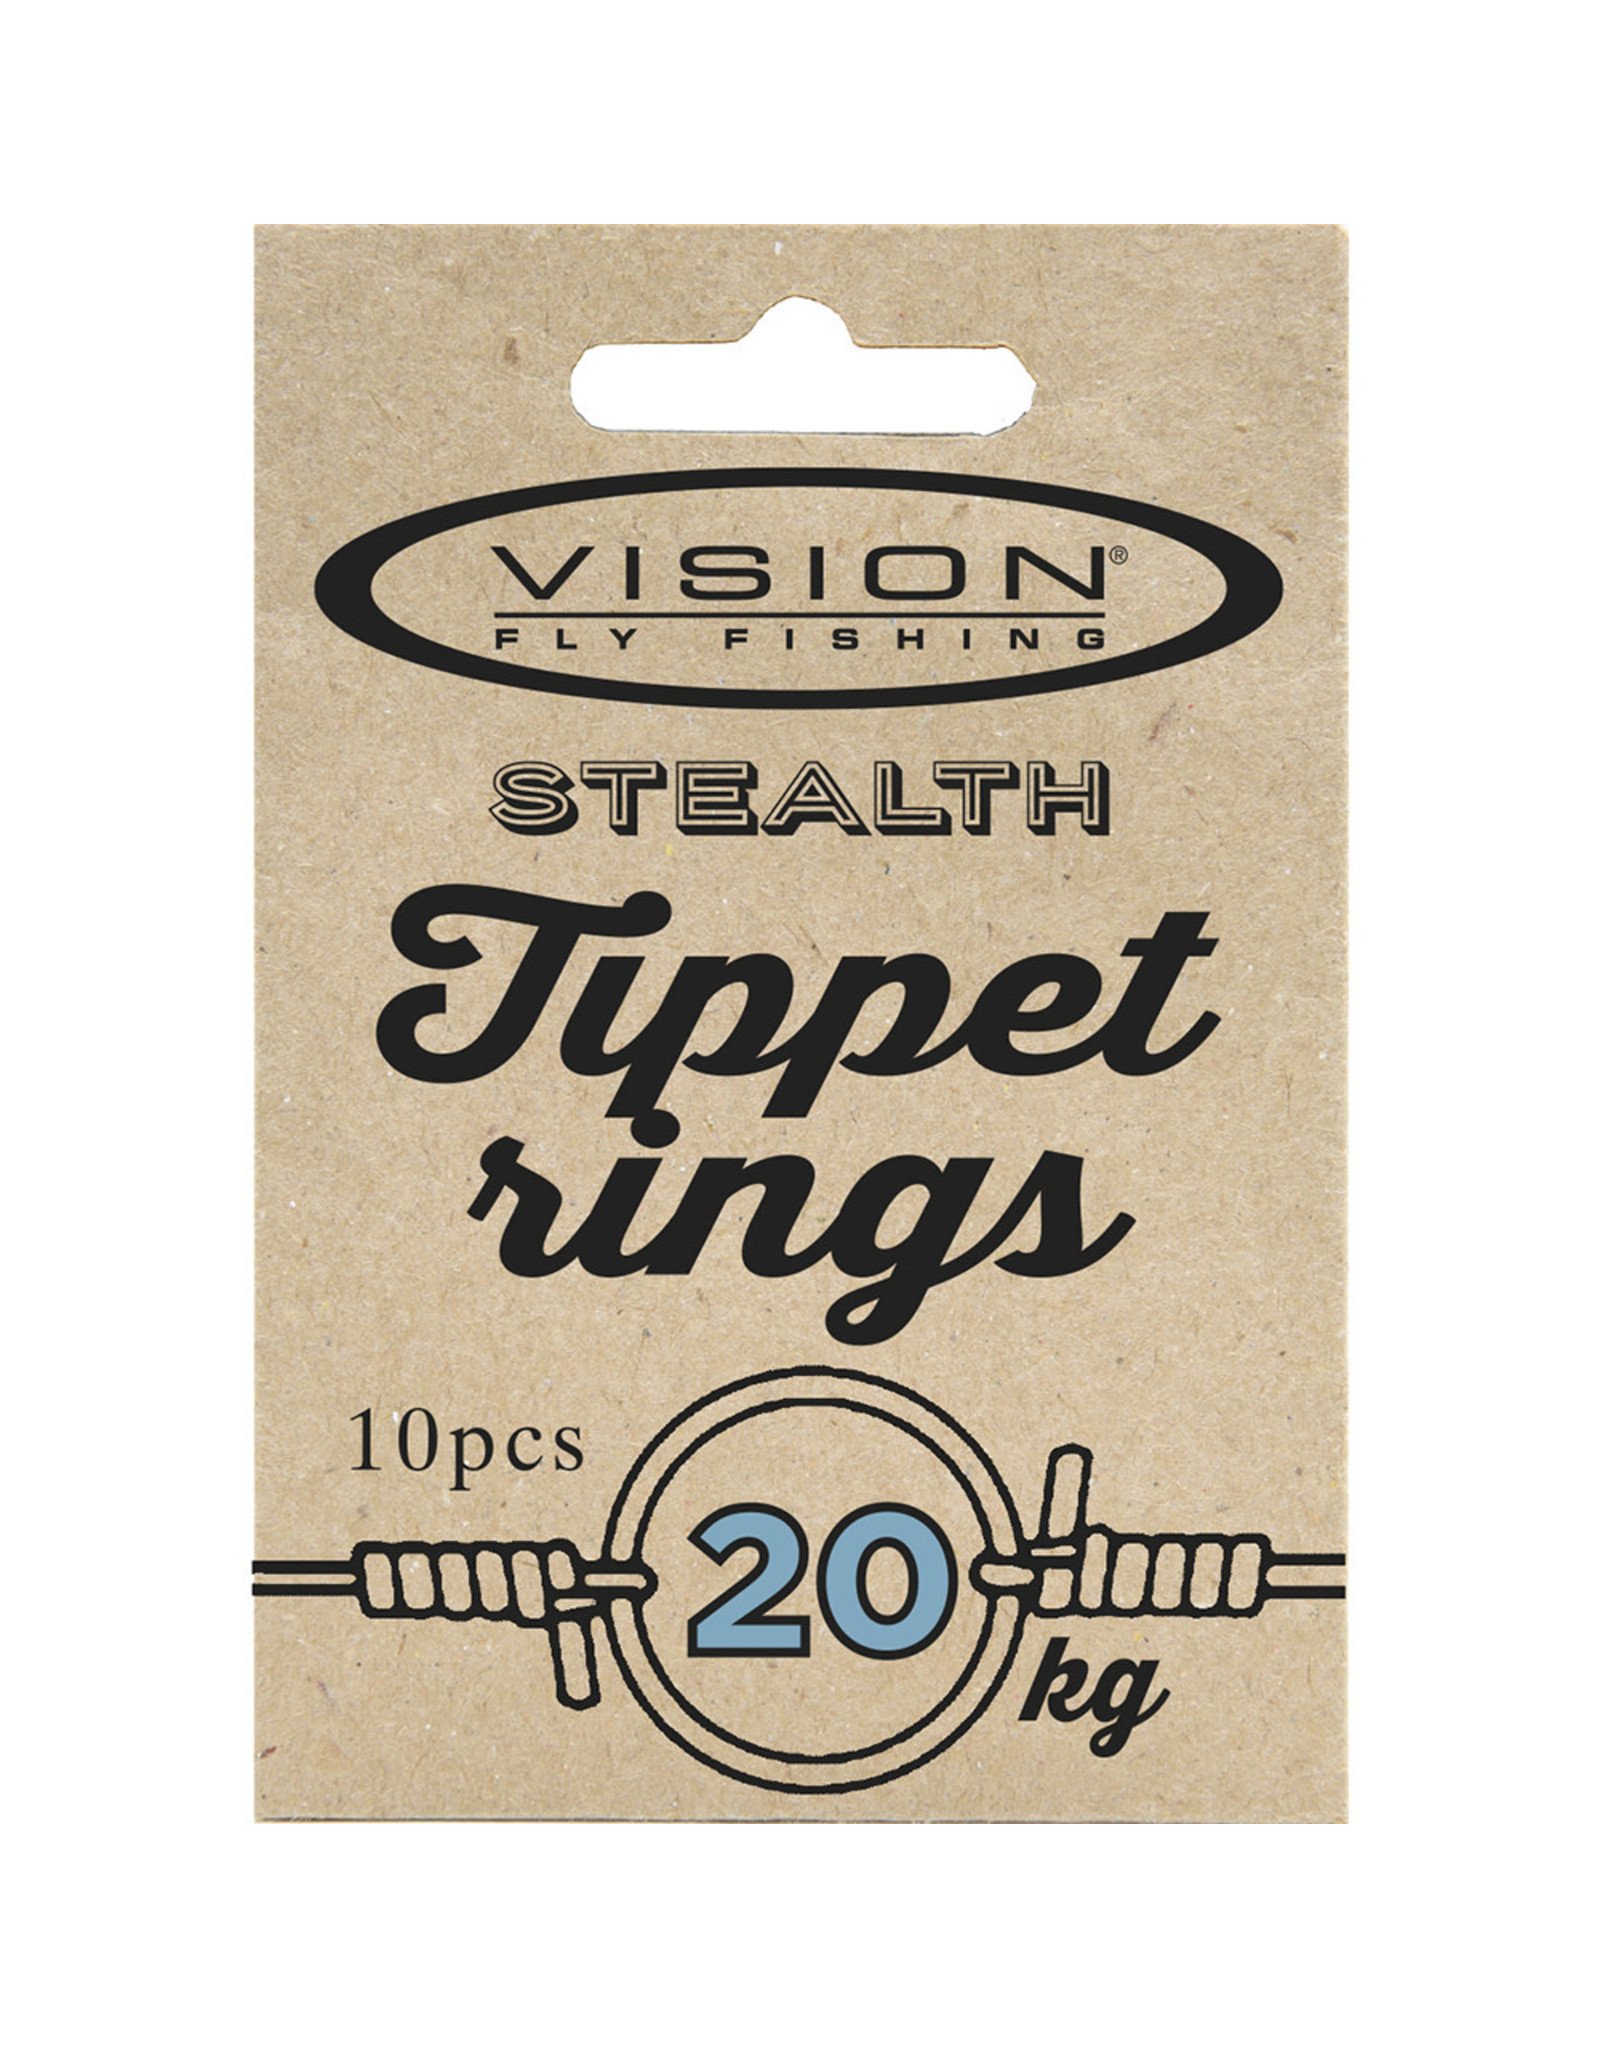 Tippet Rings for Fly Fishing, 5 Sizes 50Pcs Set Stainless Steel